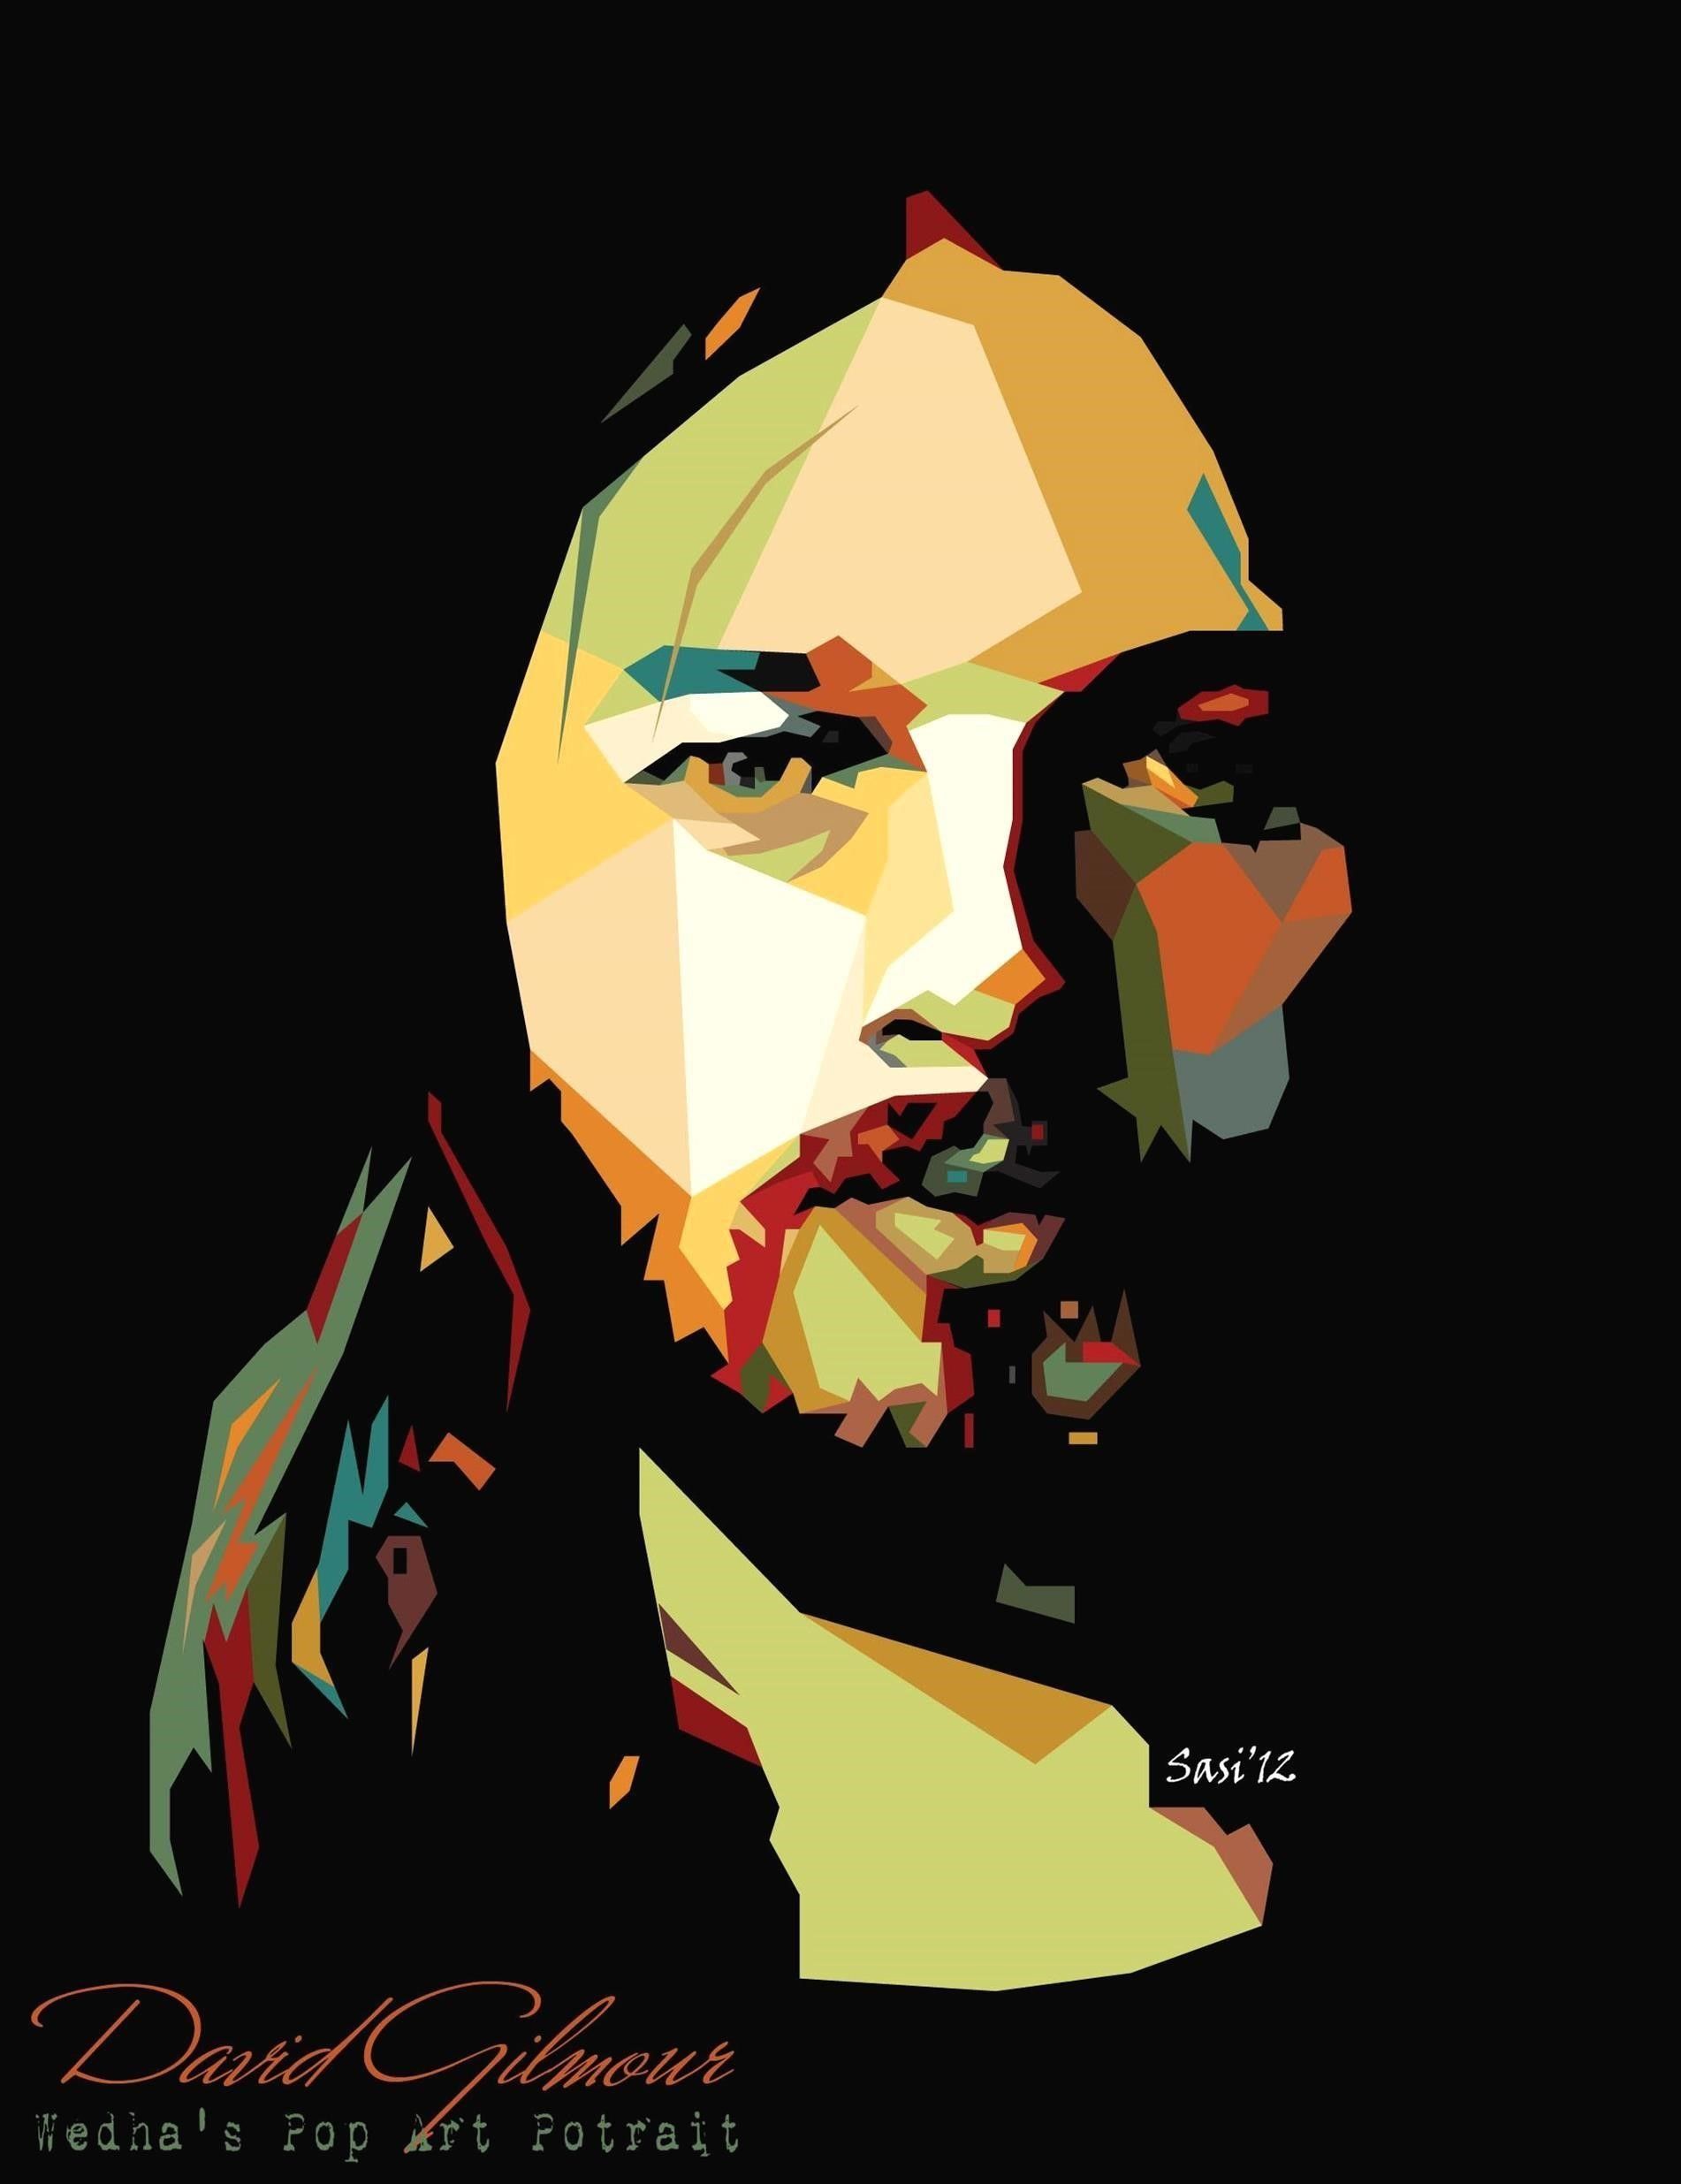 Best HD Photos Wallpapers Pics of David Gilmour Pink Floyd in